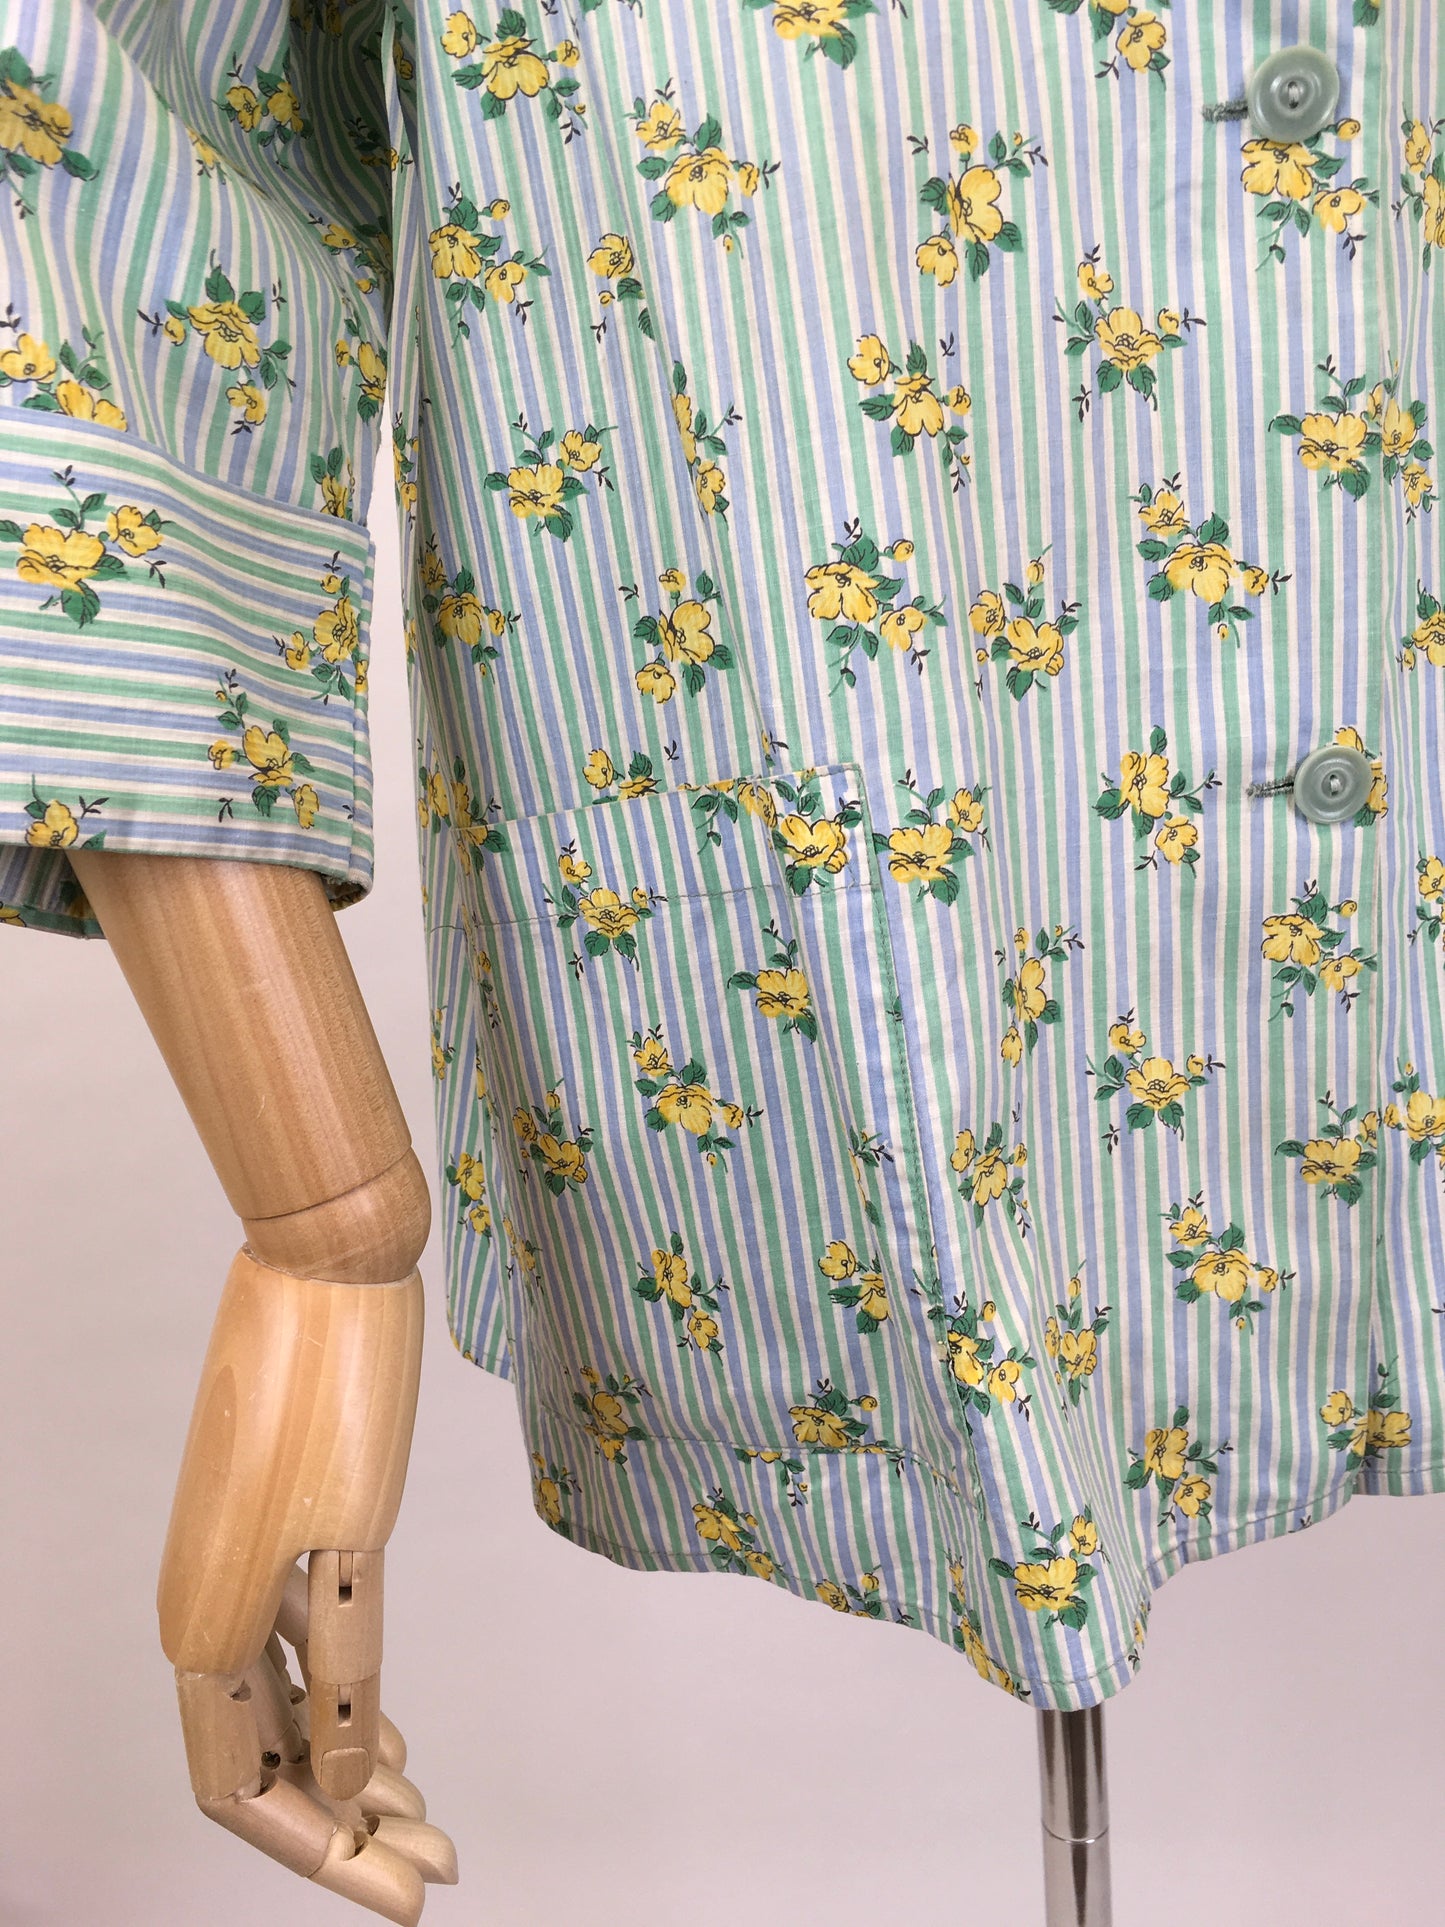 Original 1950s Smock Made By ‘ Country Reg’d ‘ - In a Lovely Contrast Floral and Stripe in Soft Greens, Blues and Buttercup Yellows